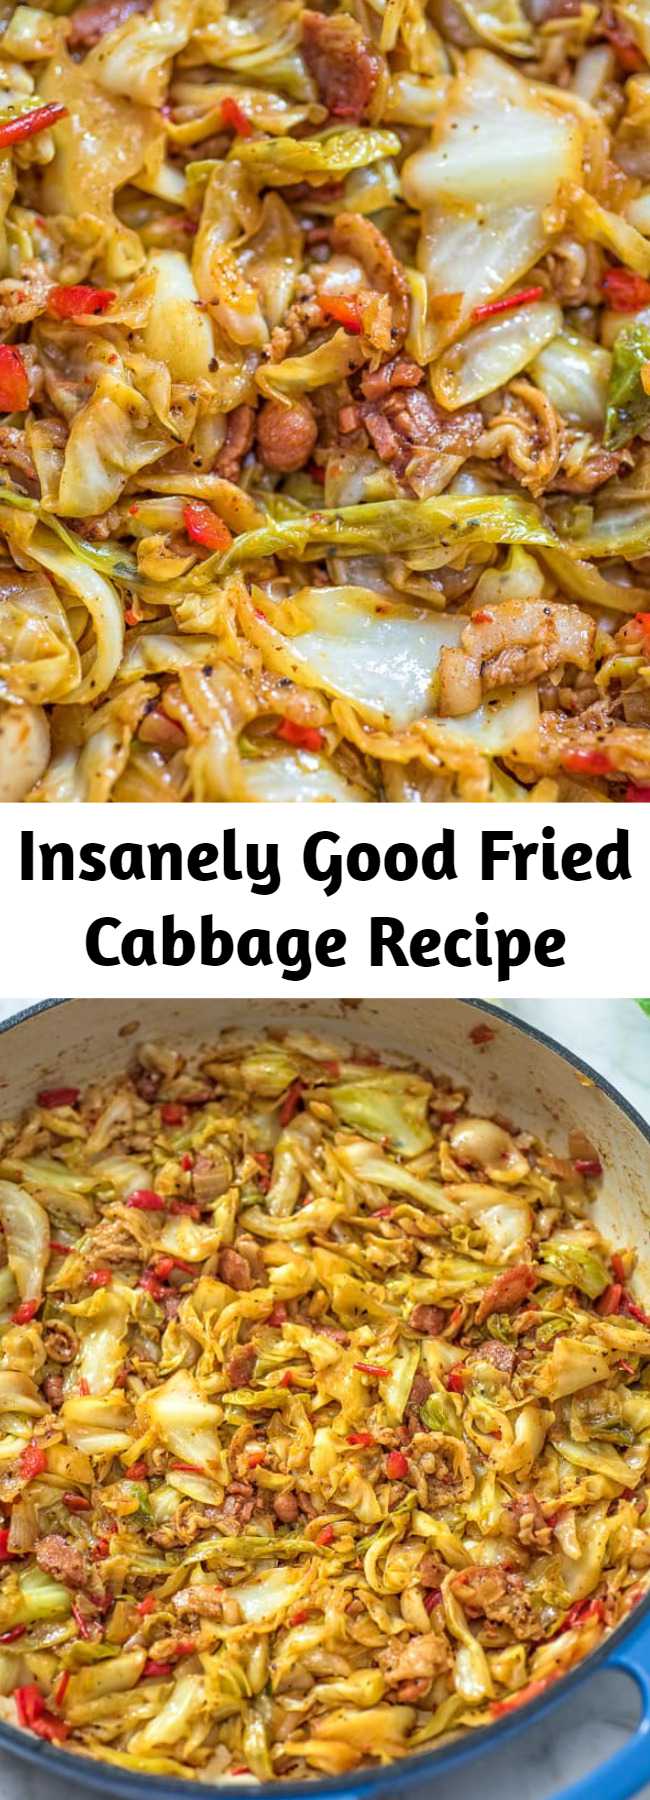 Insanely Good Fried Cabbage Recipe - This Fried Cabbage recipe is insanely good! Made with bacon, onion, bell pepper, and a touch of hot sauce, it is easy to make, simple, and comes out perfect every time! #cabbage #dinner #thanksgiving #winter #bacon